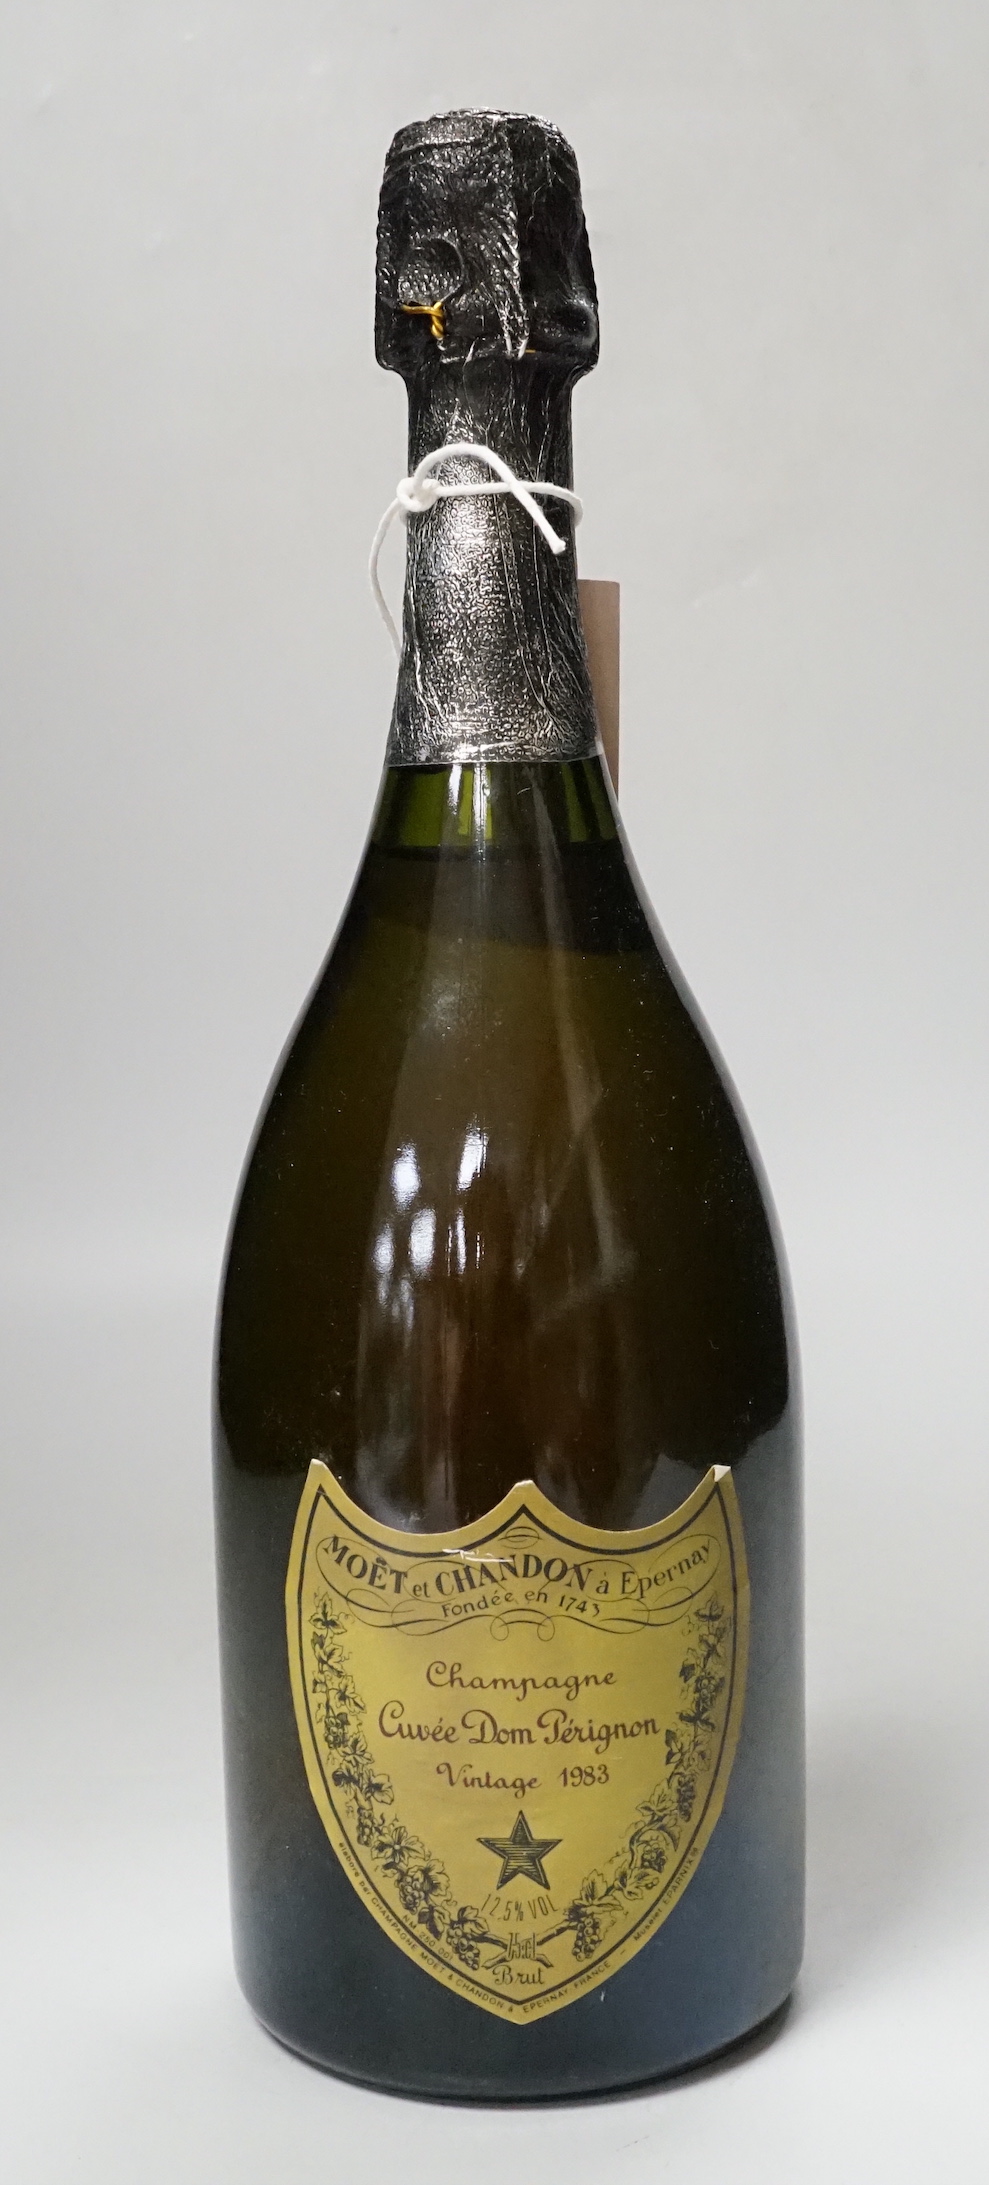 One bottle of Champagne Cuvee Dom Perignon 1983, boxed